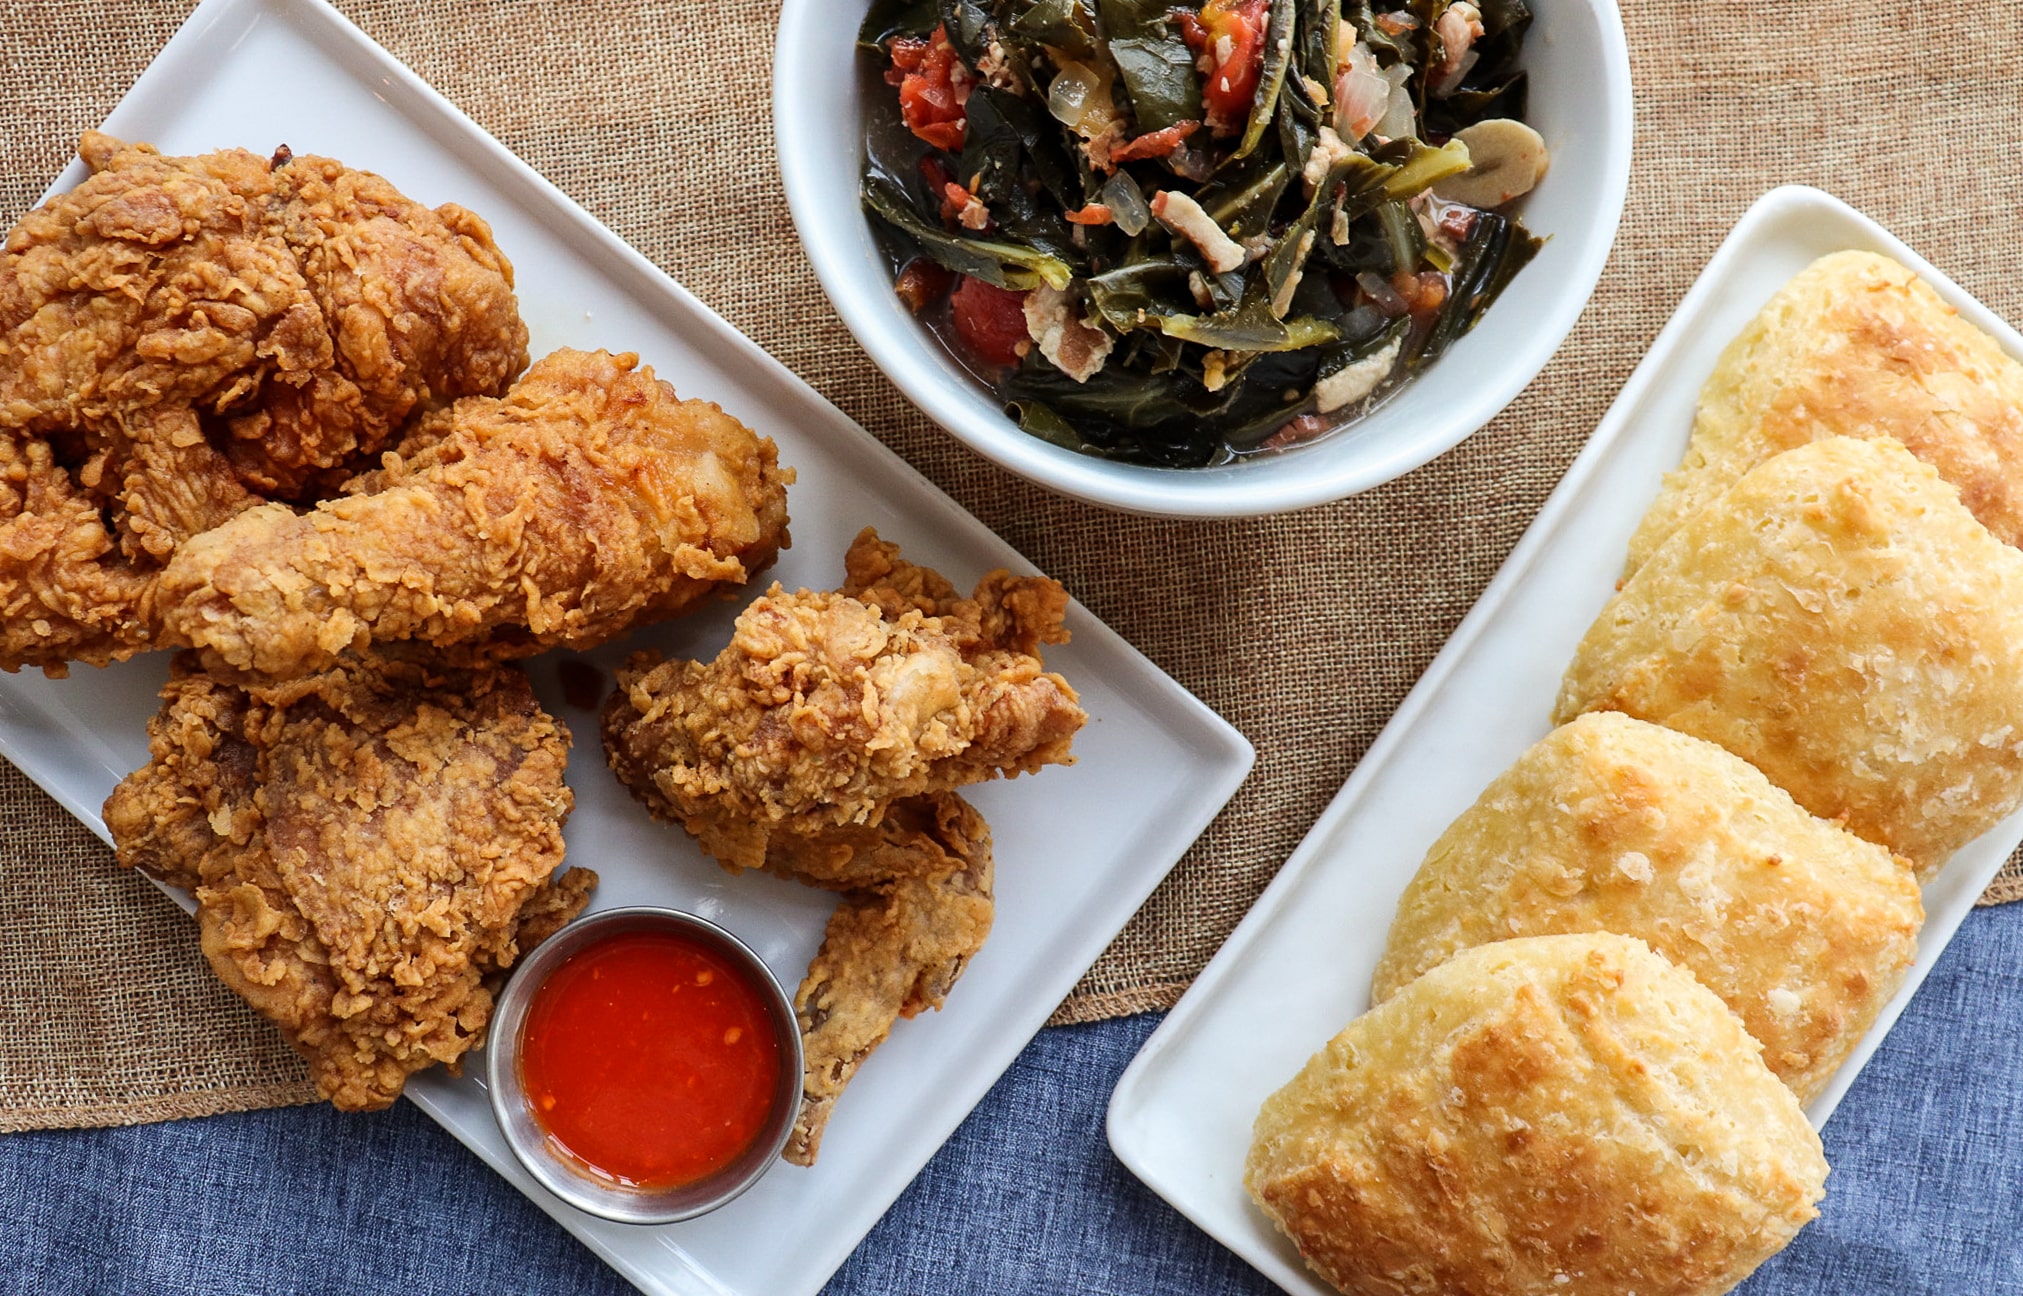 An image of Huckleberry's Fried Chicken, collard greens, and biscuits for Friday's supper.